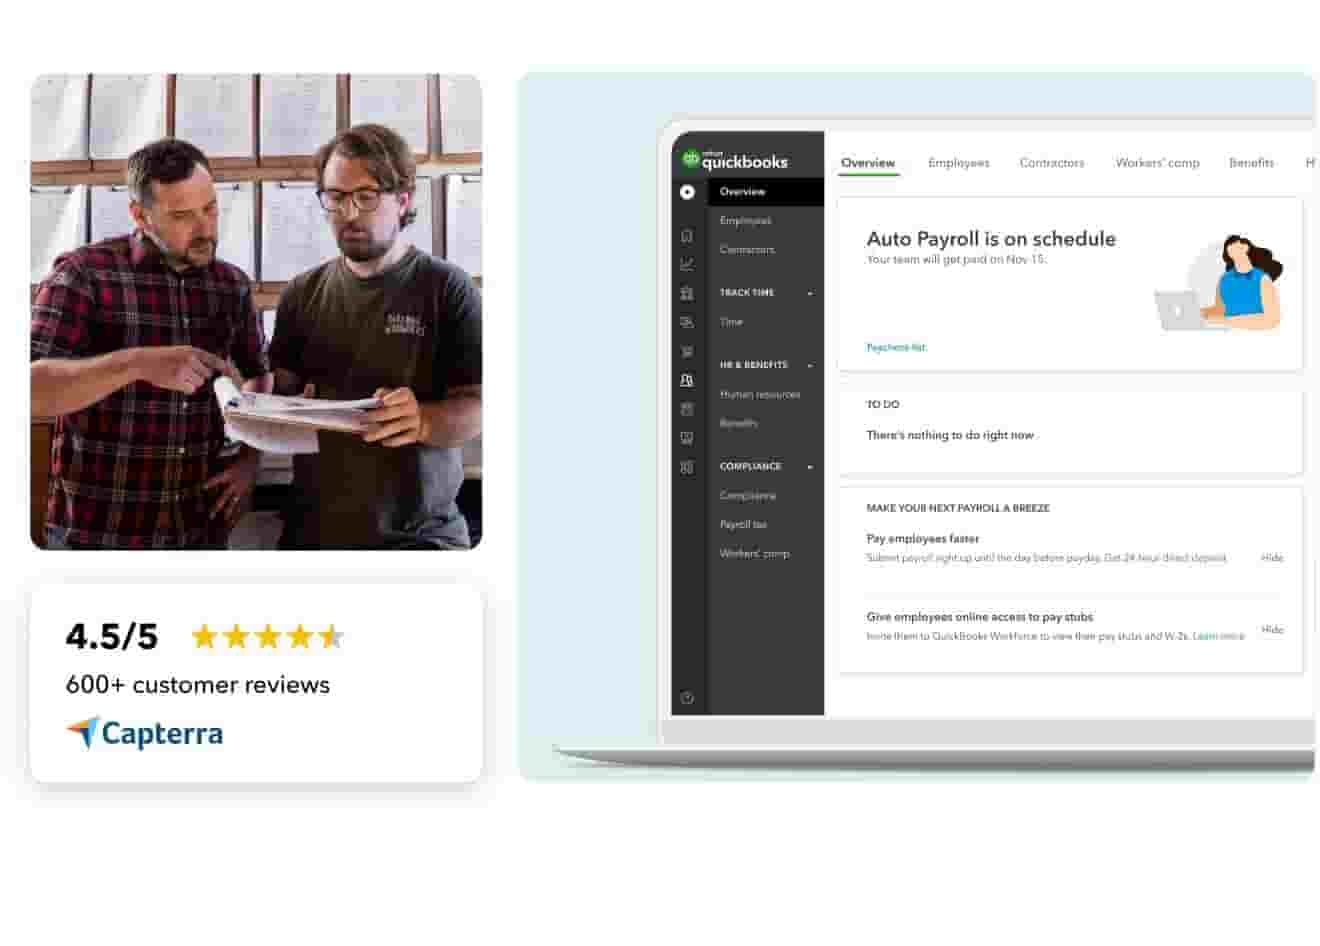 A collage of 3 images images. One image is a photo of two people looking at paperwork on a clipboard. Directly below that image is a star rating of 4.5 with 600 plus customer reviews. This star rating has a logo below it that reads: Capterra. To the right of both of these images is an illustration of the Payroll dashboard in QuickBooks Online. On the dashboard there is text that reads: Auto Payroll icon schedule.